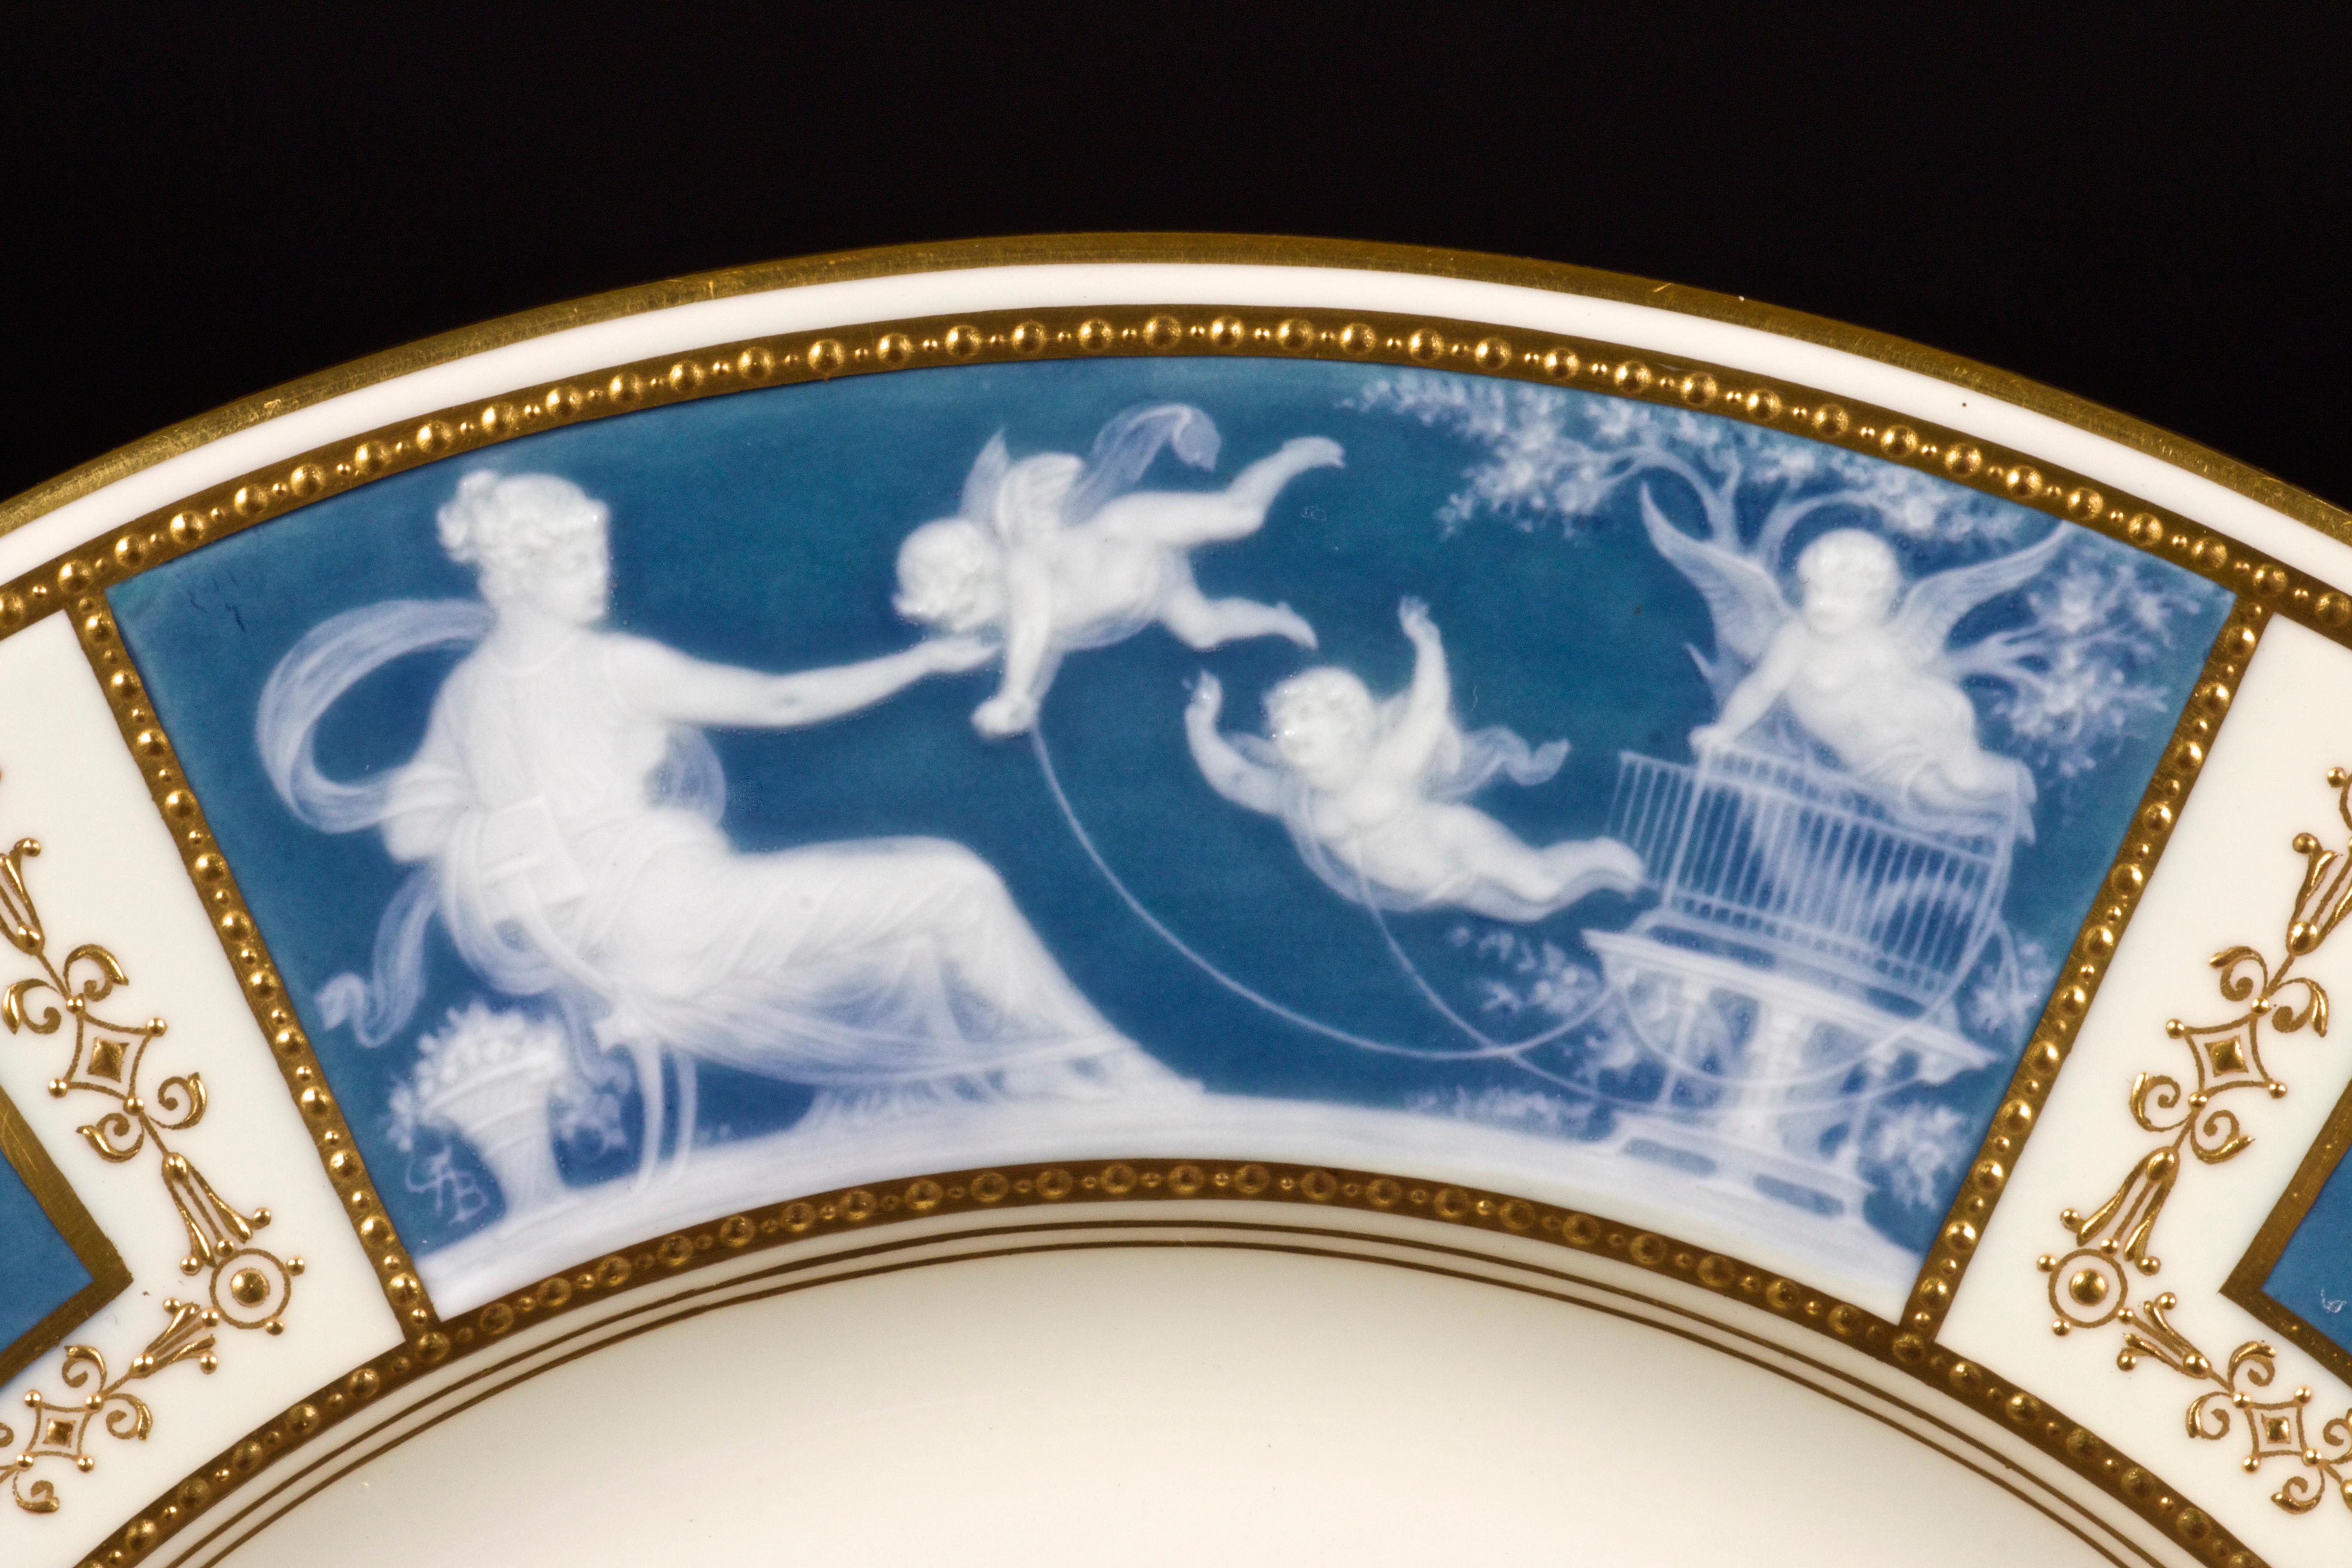 Neoclassical 8 Minton Pate-sur-pate Blue Plates for Tiffany, by Artist Albion Birks For Sale